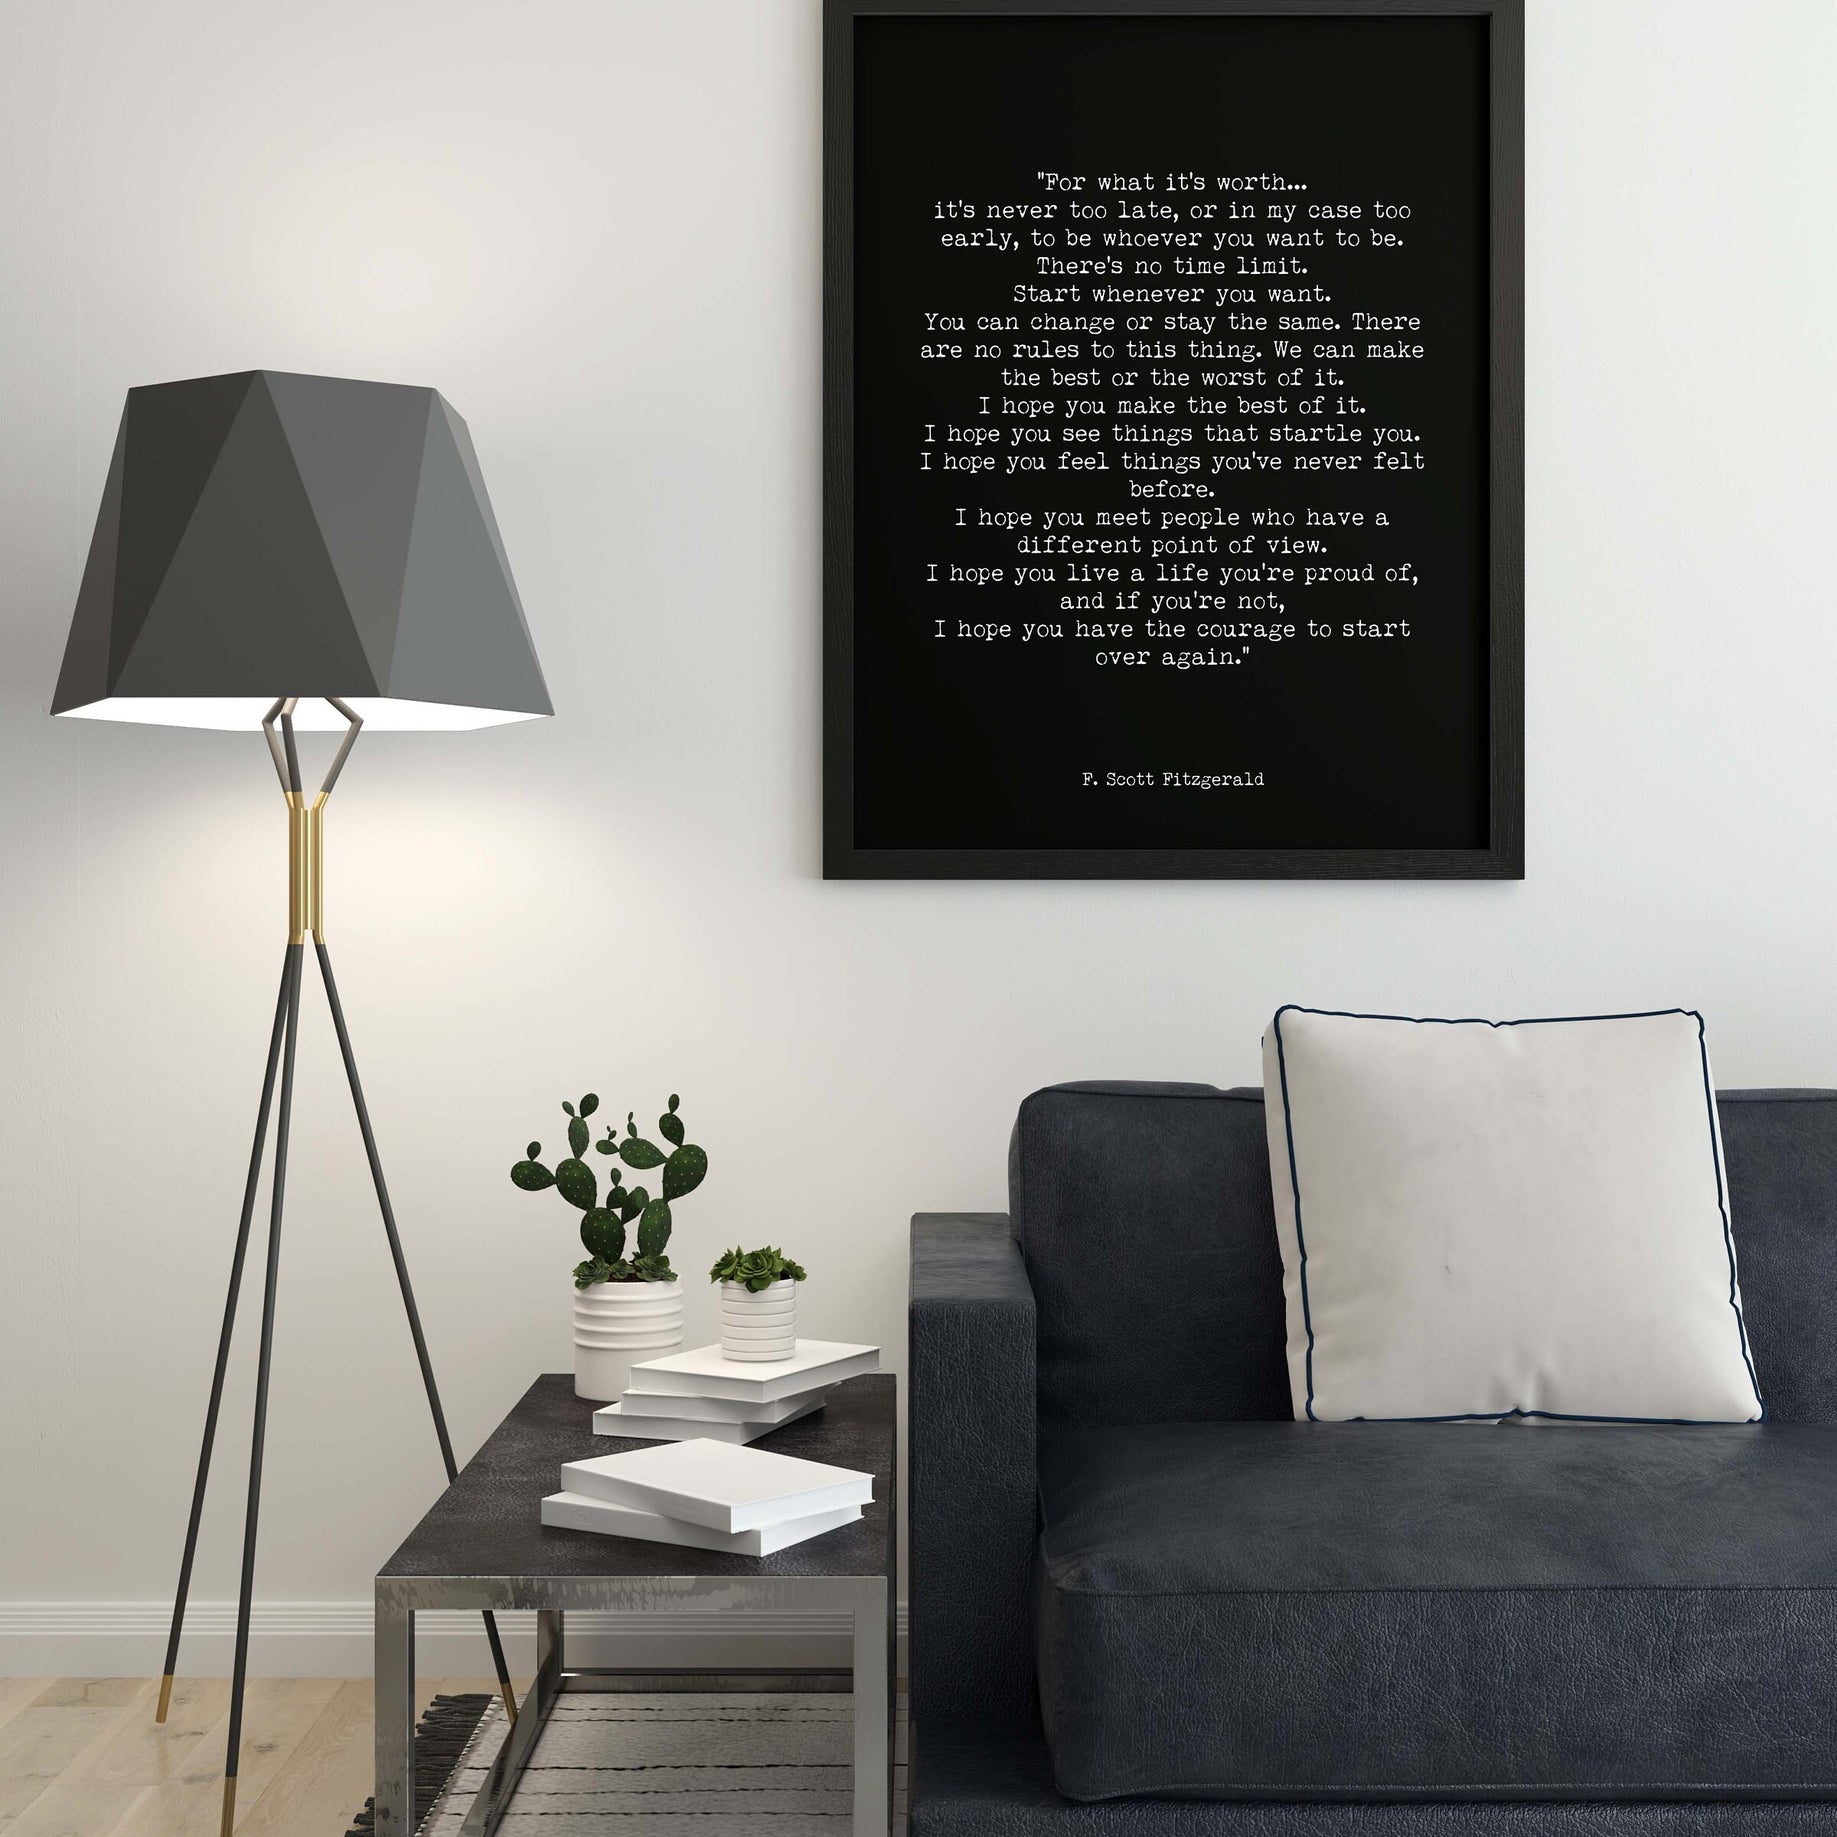 Inspirational F Scott Fitzgerald Framed Art Print - Make The Best Of It Quote Ready to Hang Art